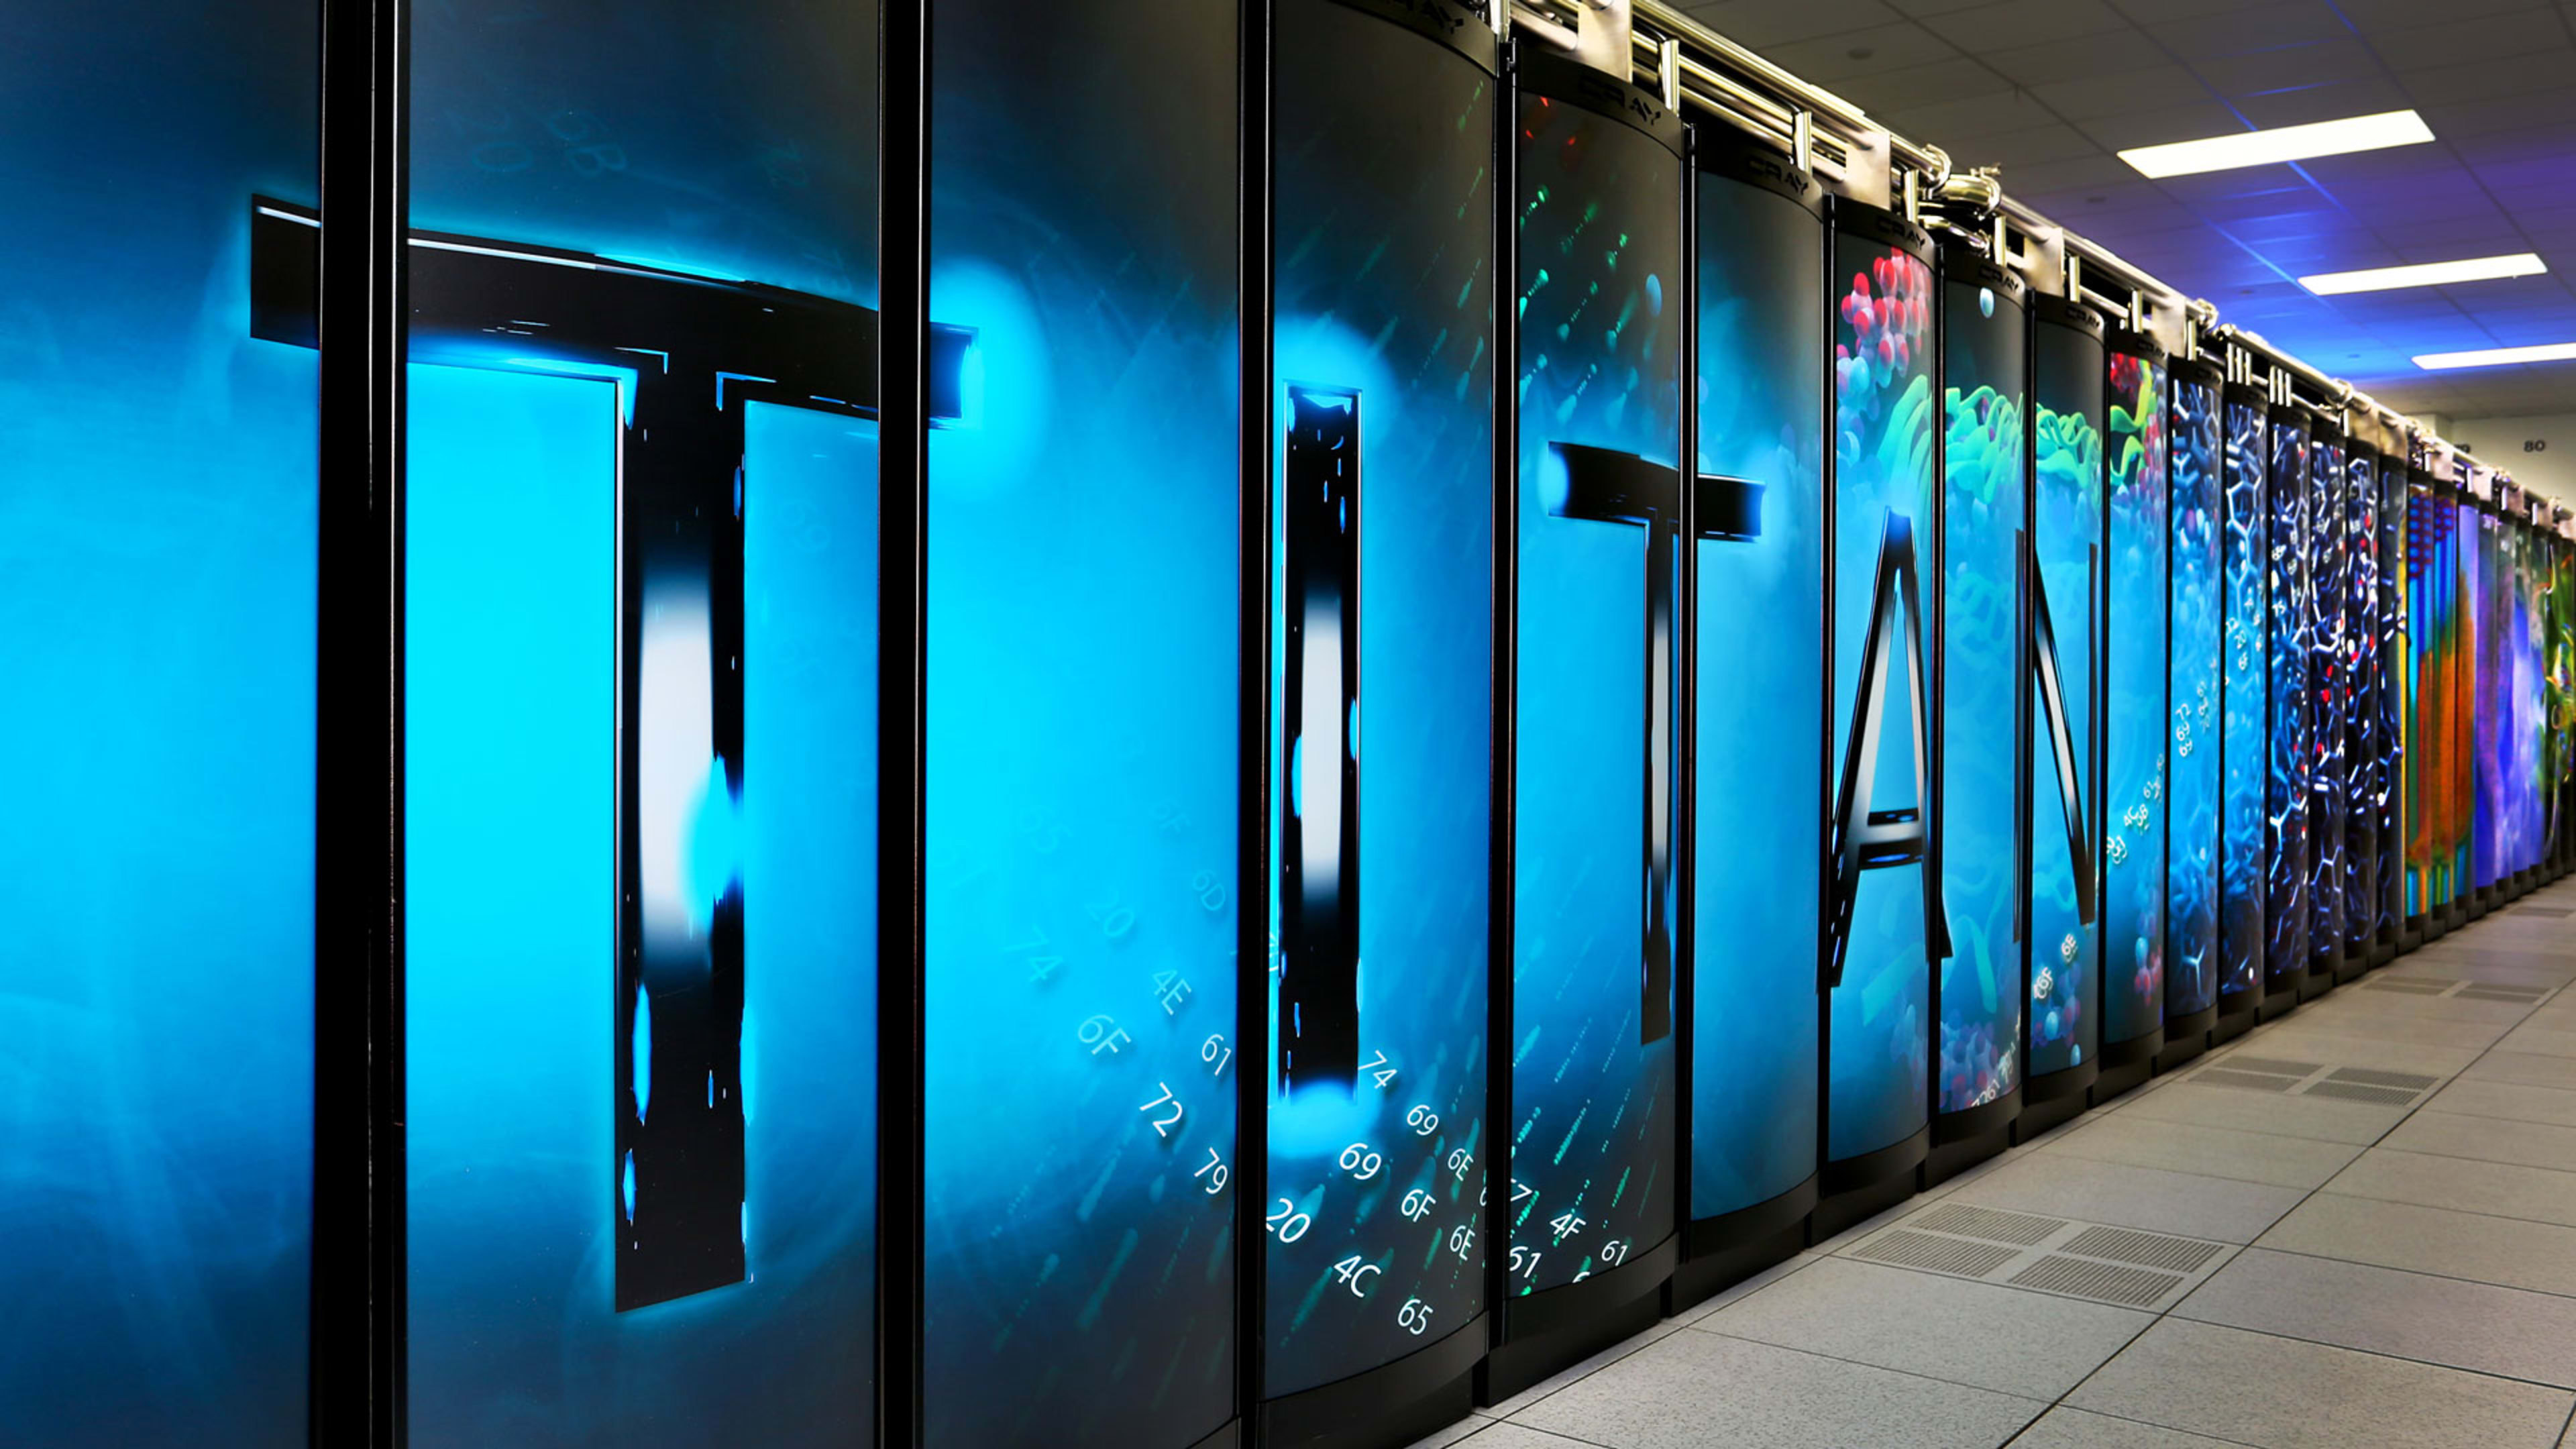 The U.S. Just Picked Intel, IBM, Nvidia, And Others To Help Make Supercomputers 50 Times Faster